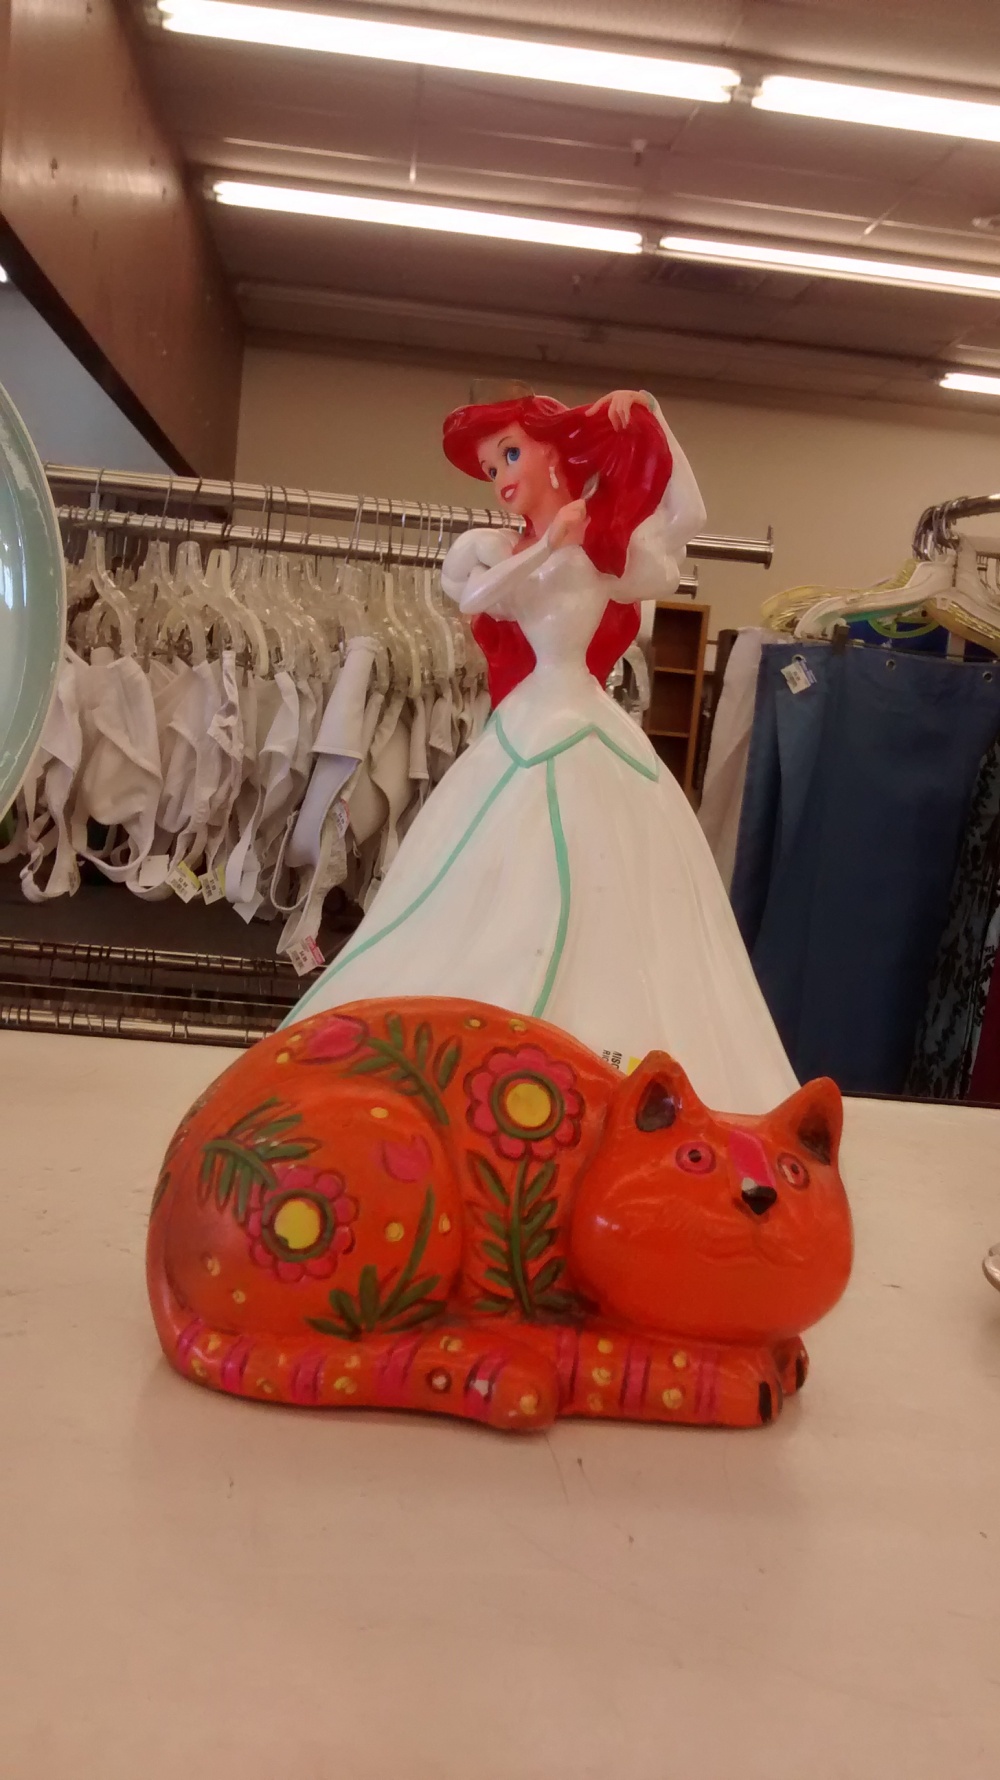 Princess Ariel in human form and the kitty. Only, this kitty is for collection coins--a kitty bank instead of a piggy bank.